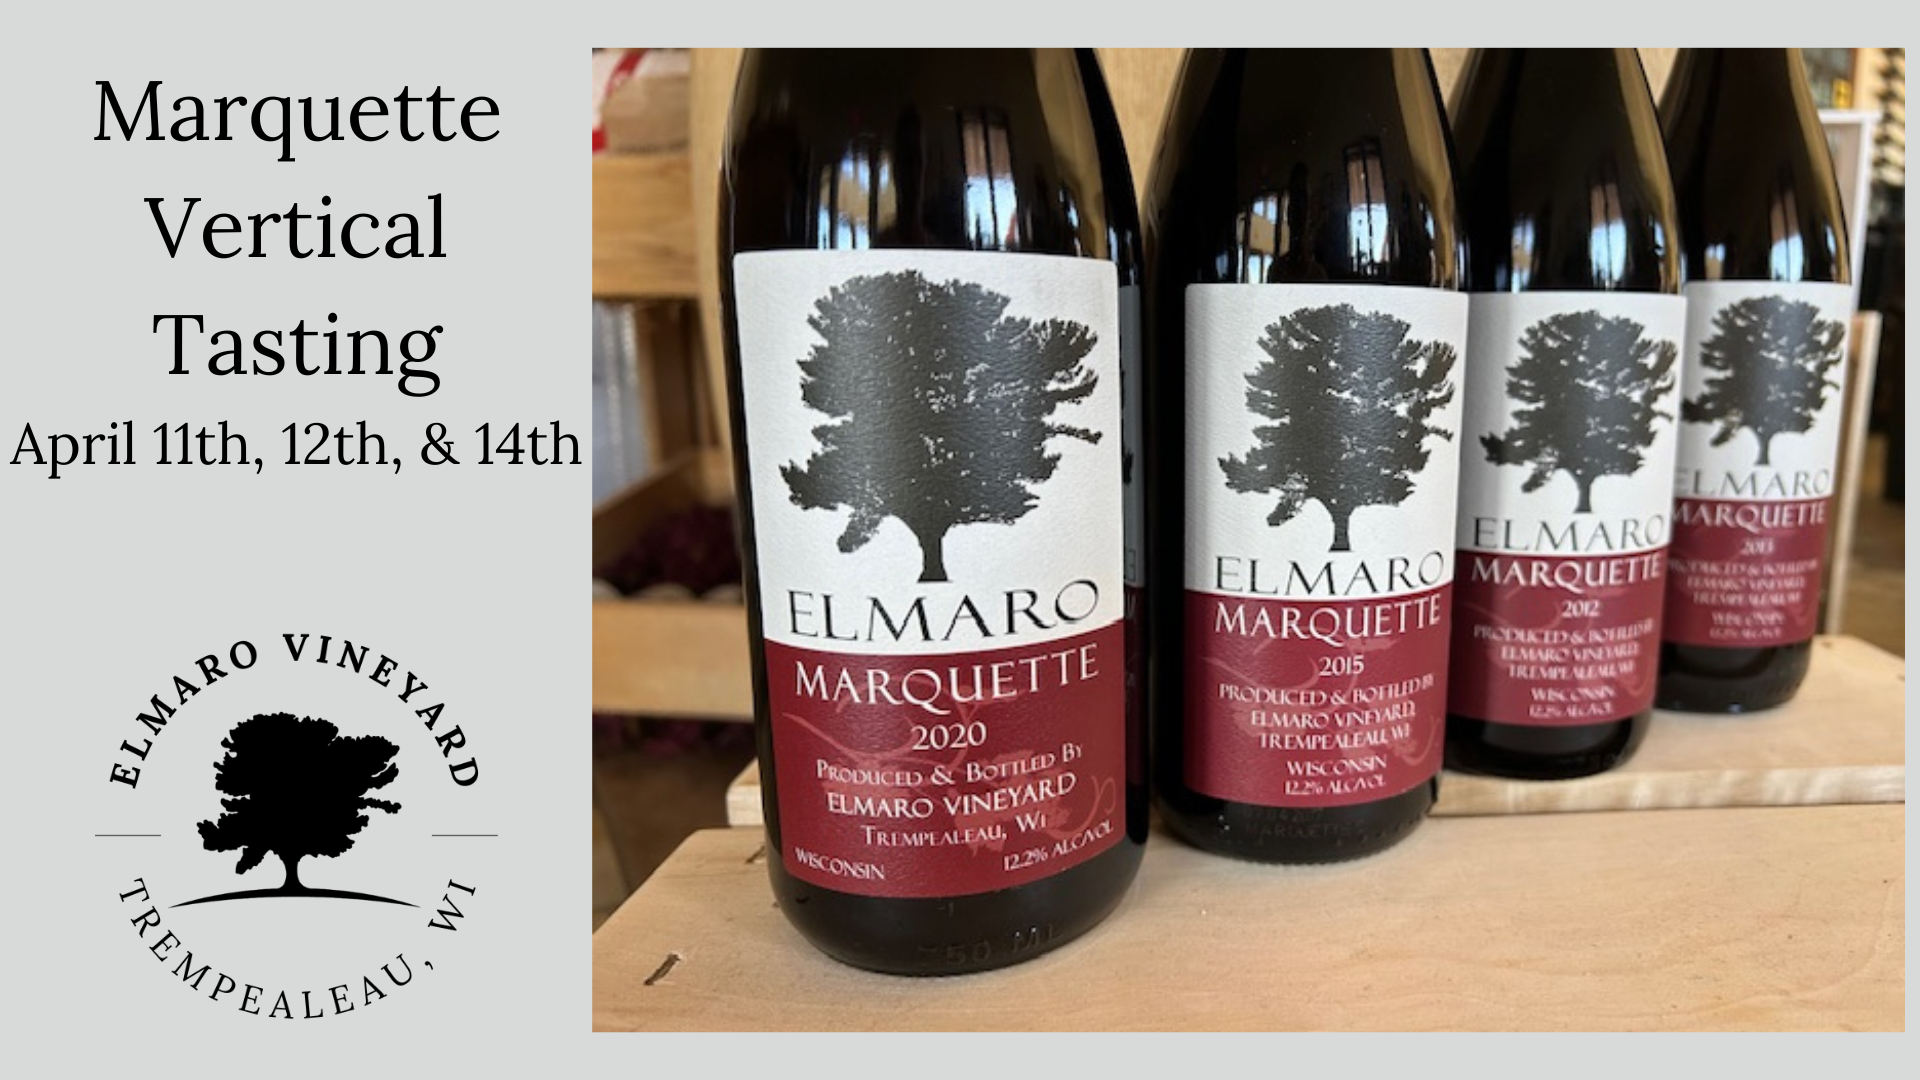 Marquette Vertical Tasting April 11th, 12th, and 14th